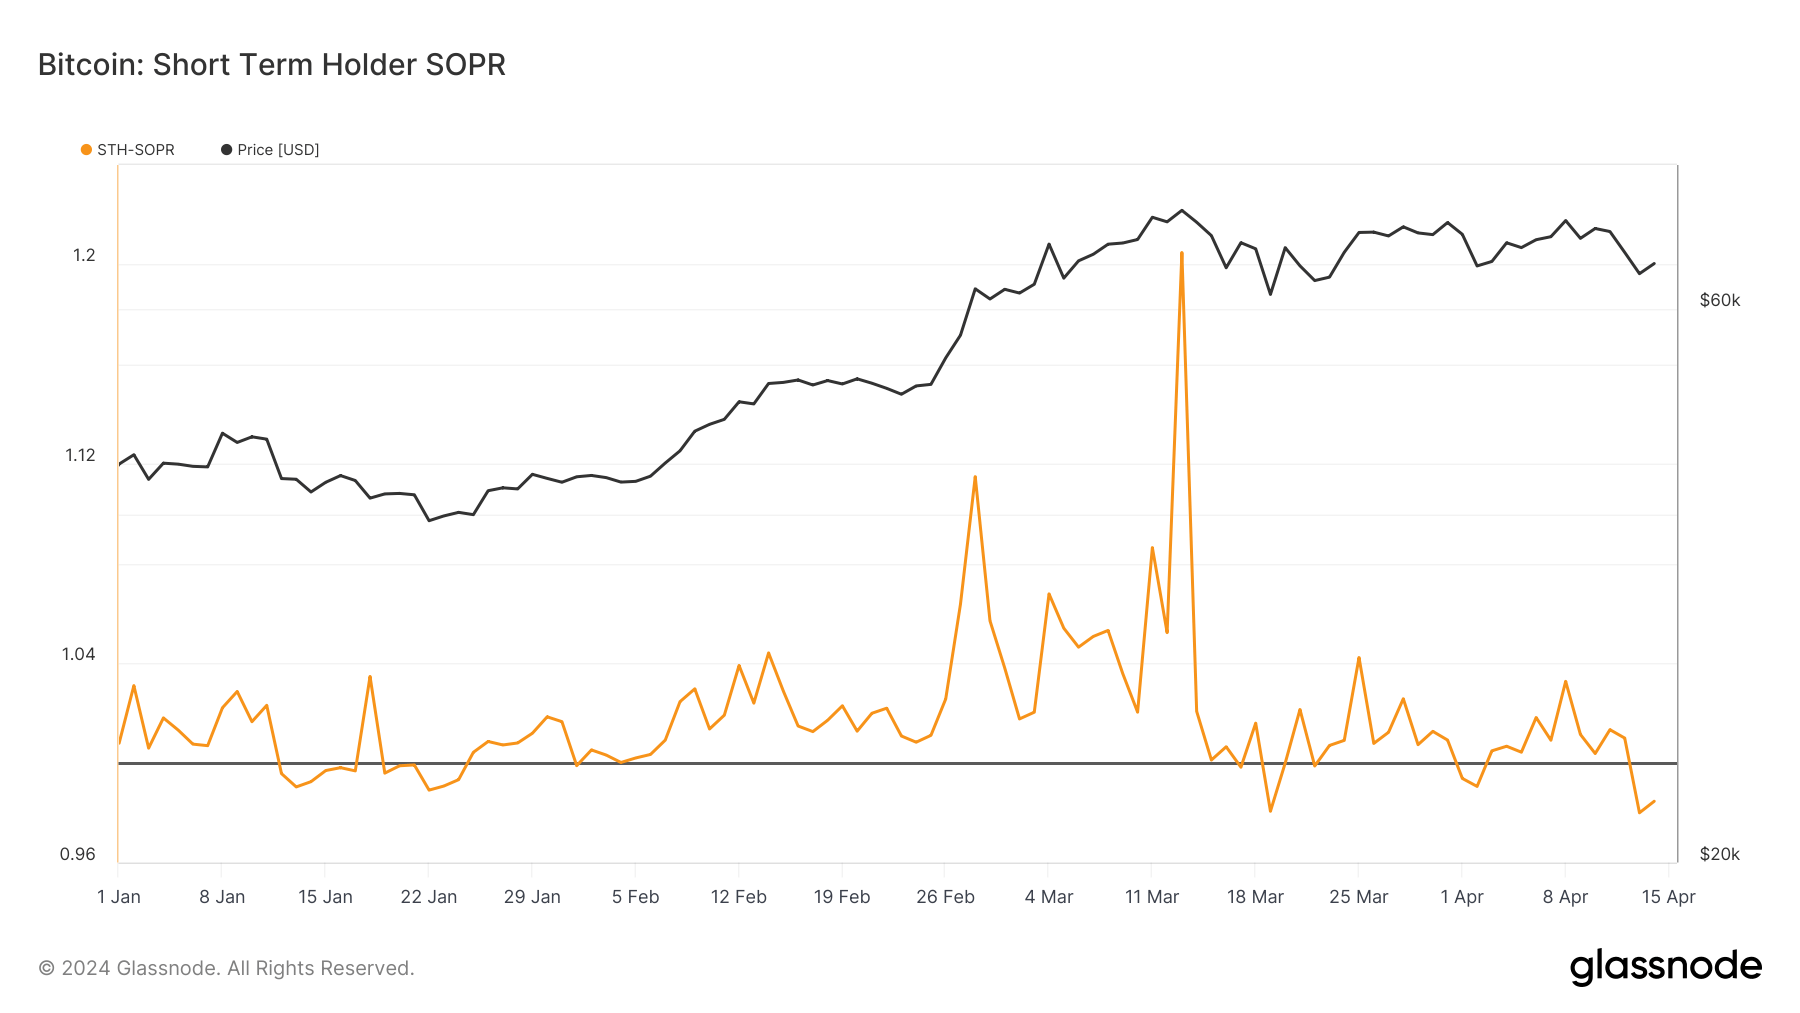 Short-term Bitcoin holders from the beginning of the year